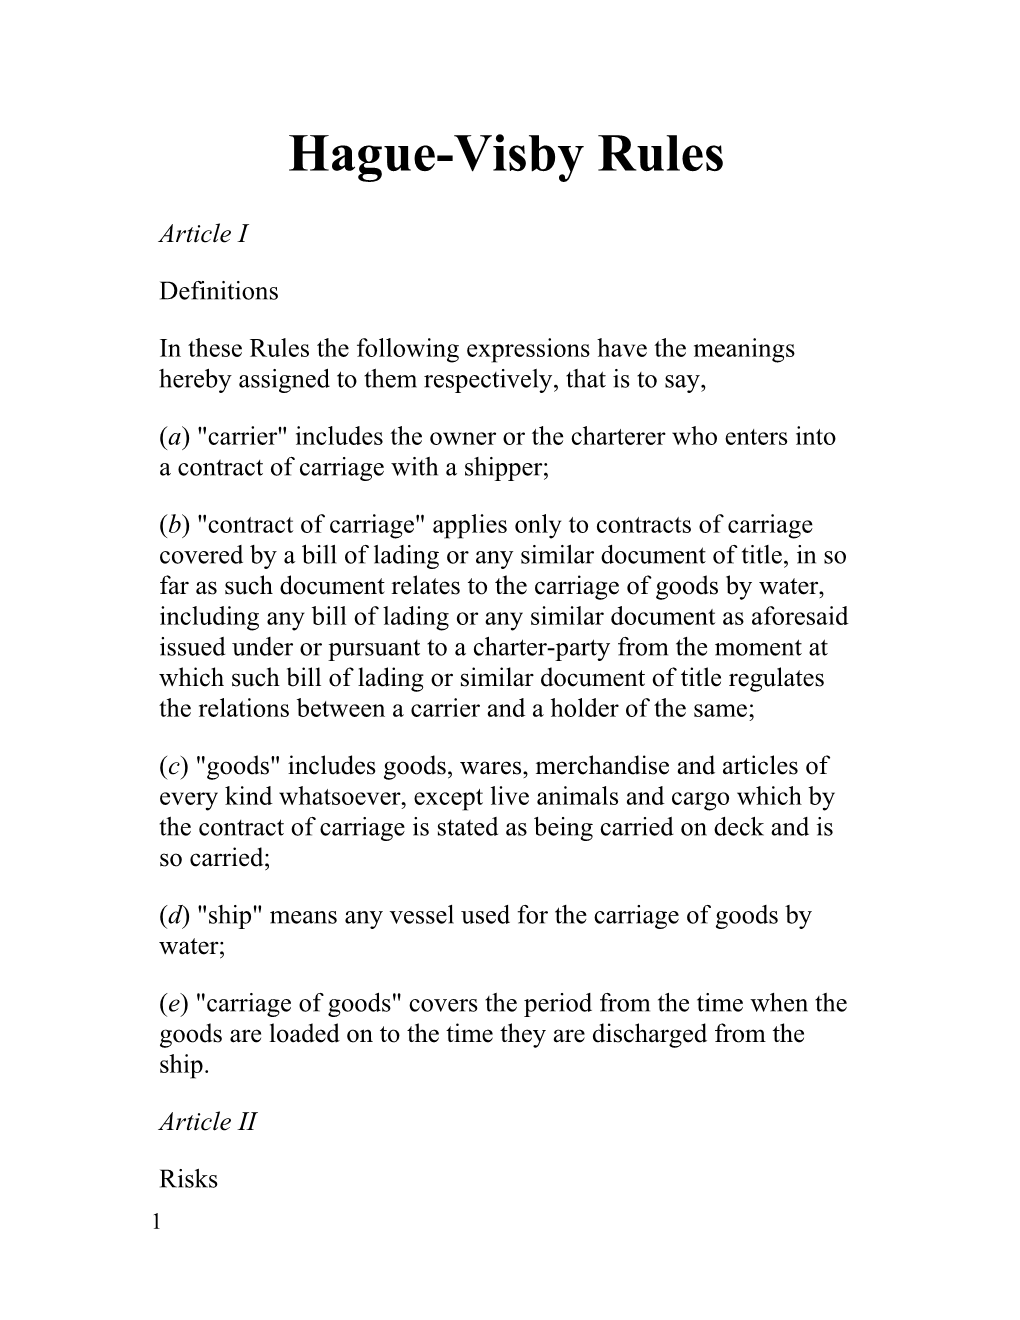 Hague-Visby Rules